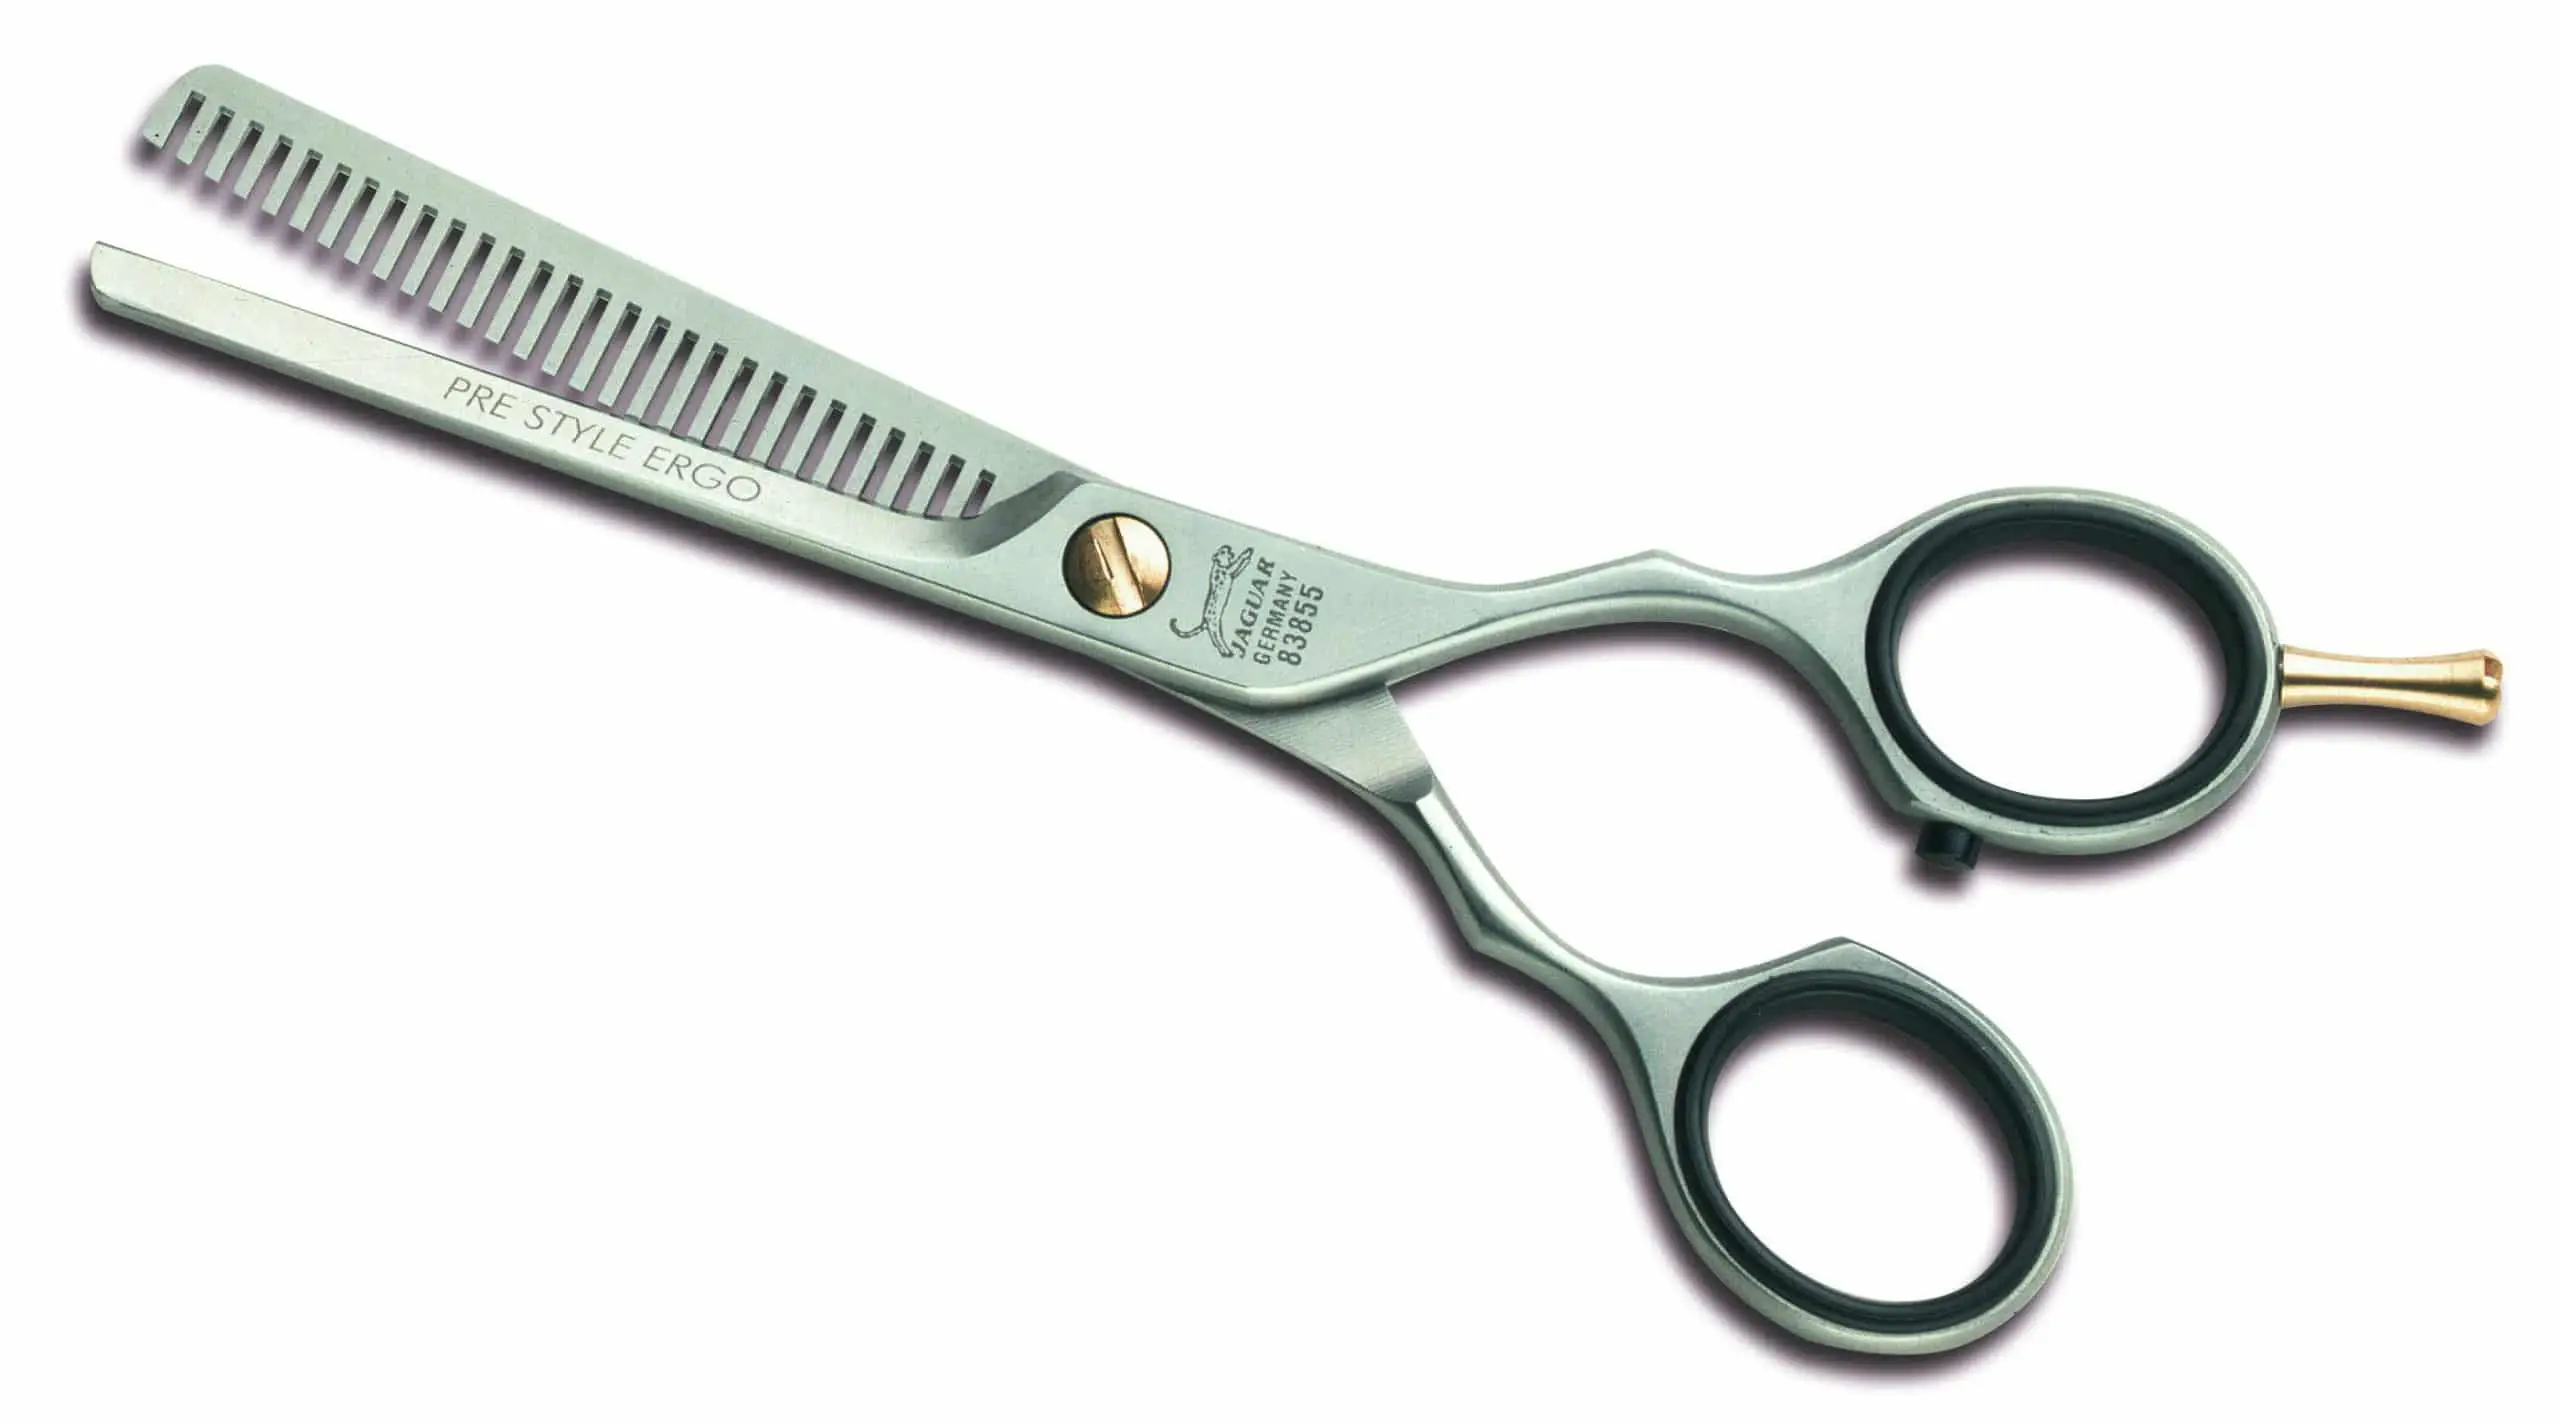 how to use thinning shears